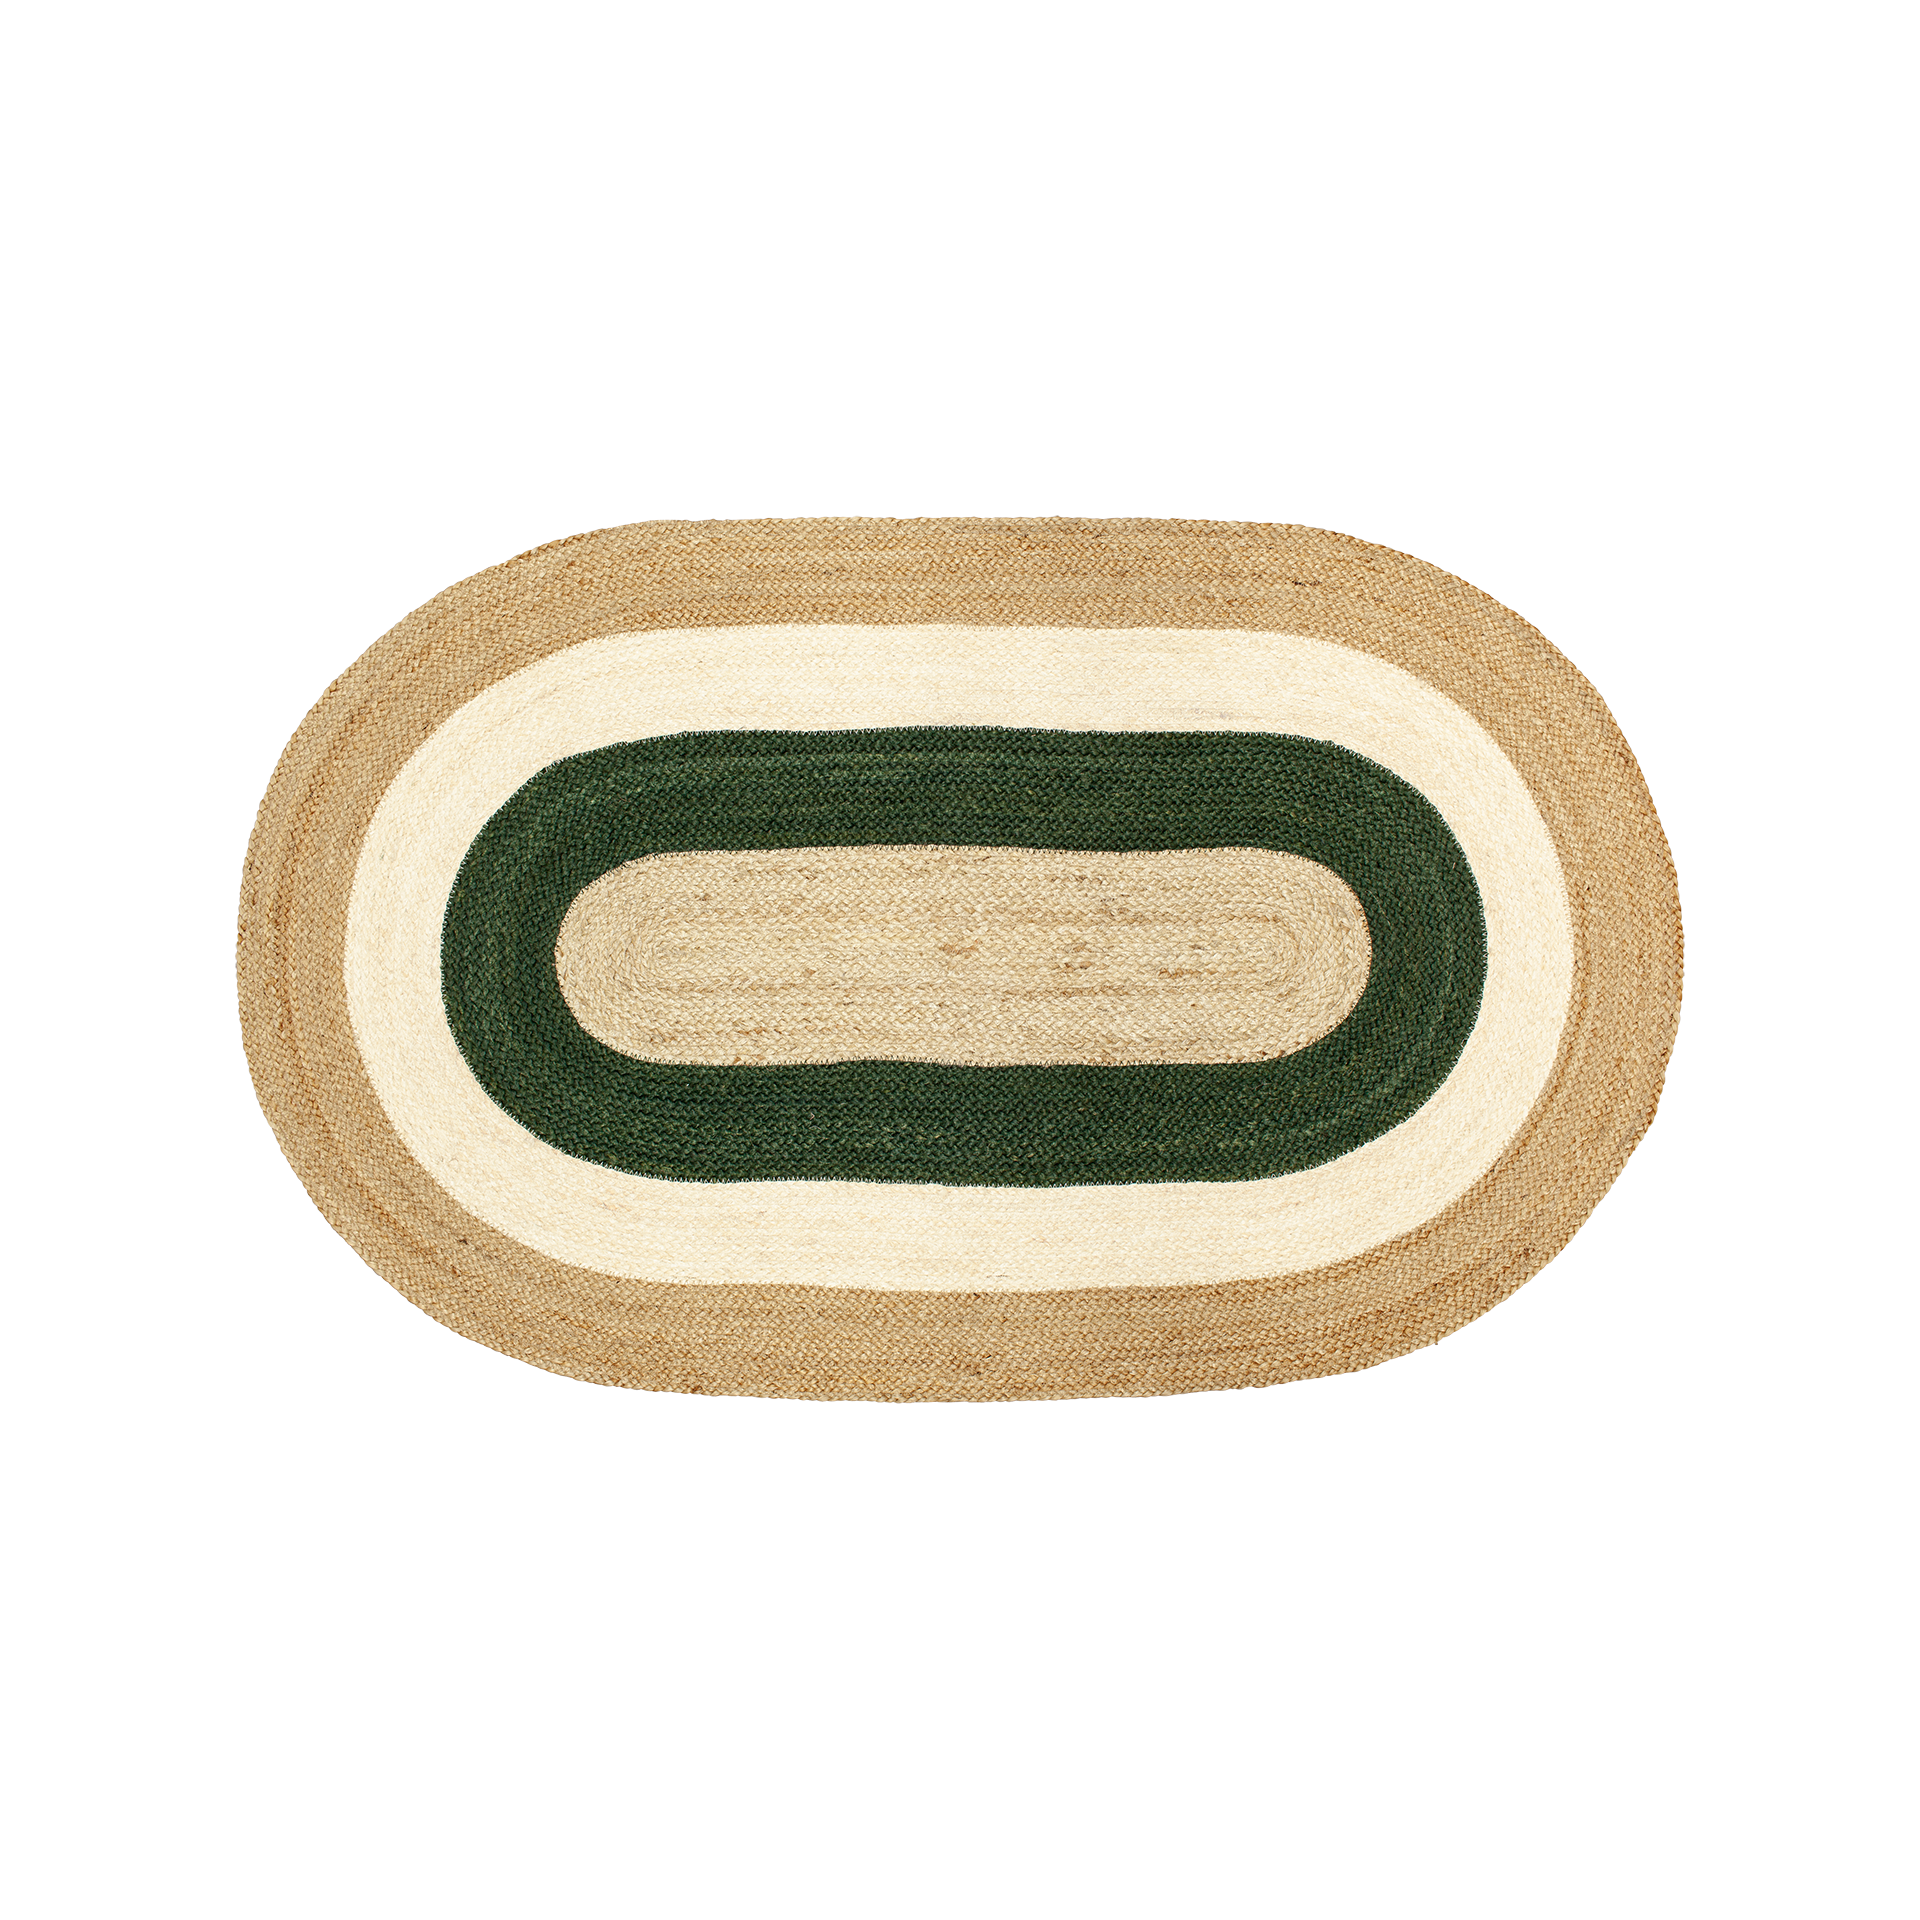 Oval rug Elin in natural and green color